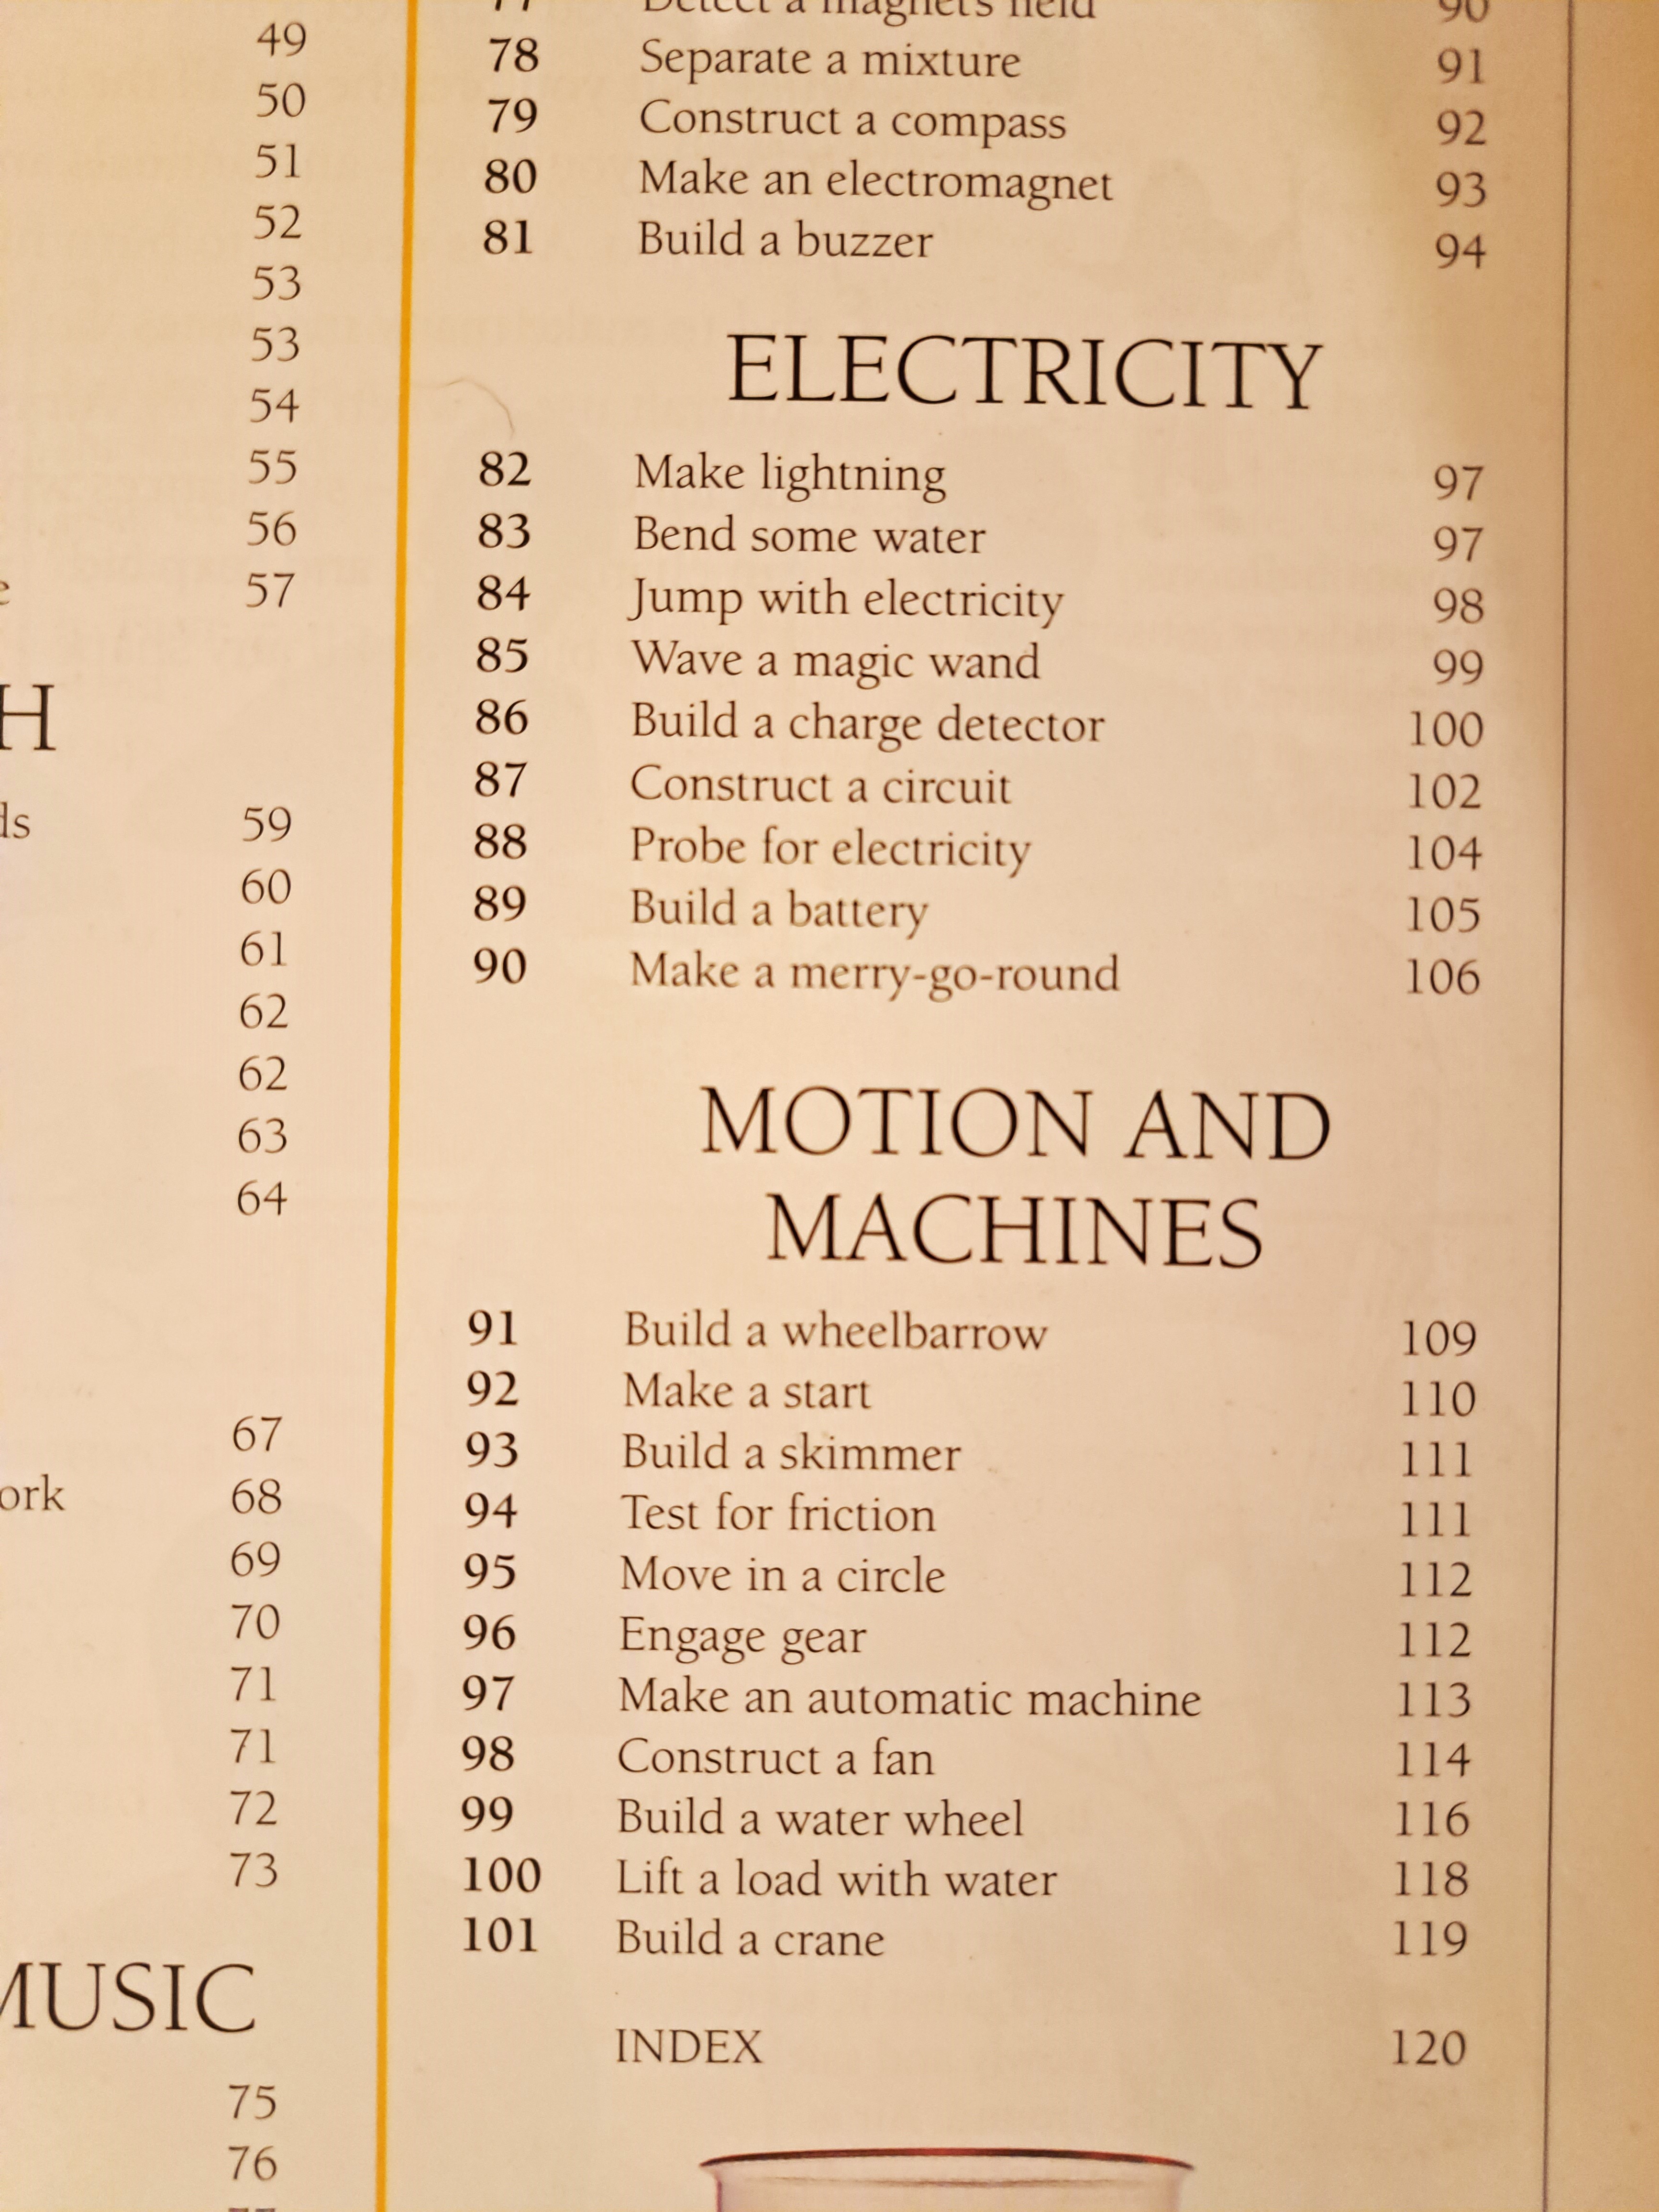 Some of Table of Contents of Book